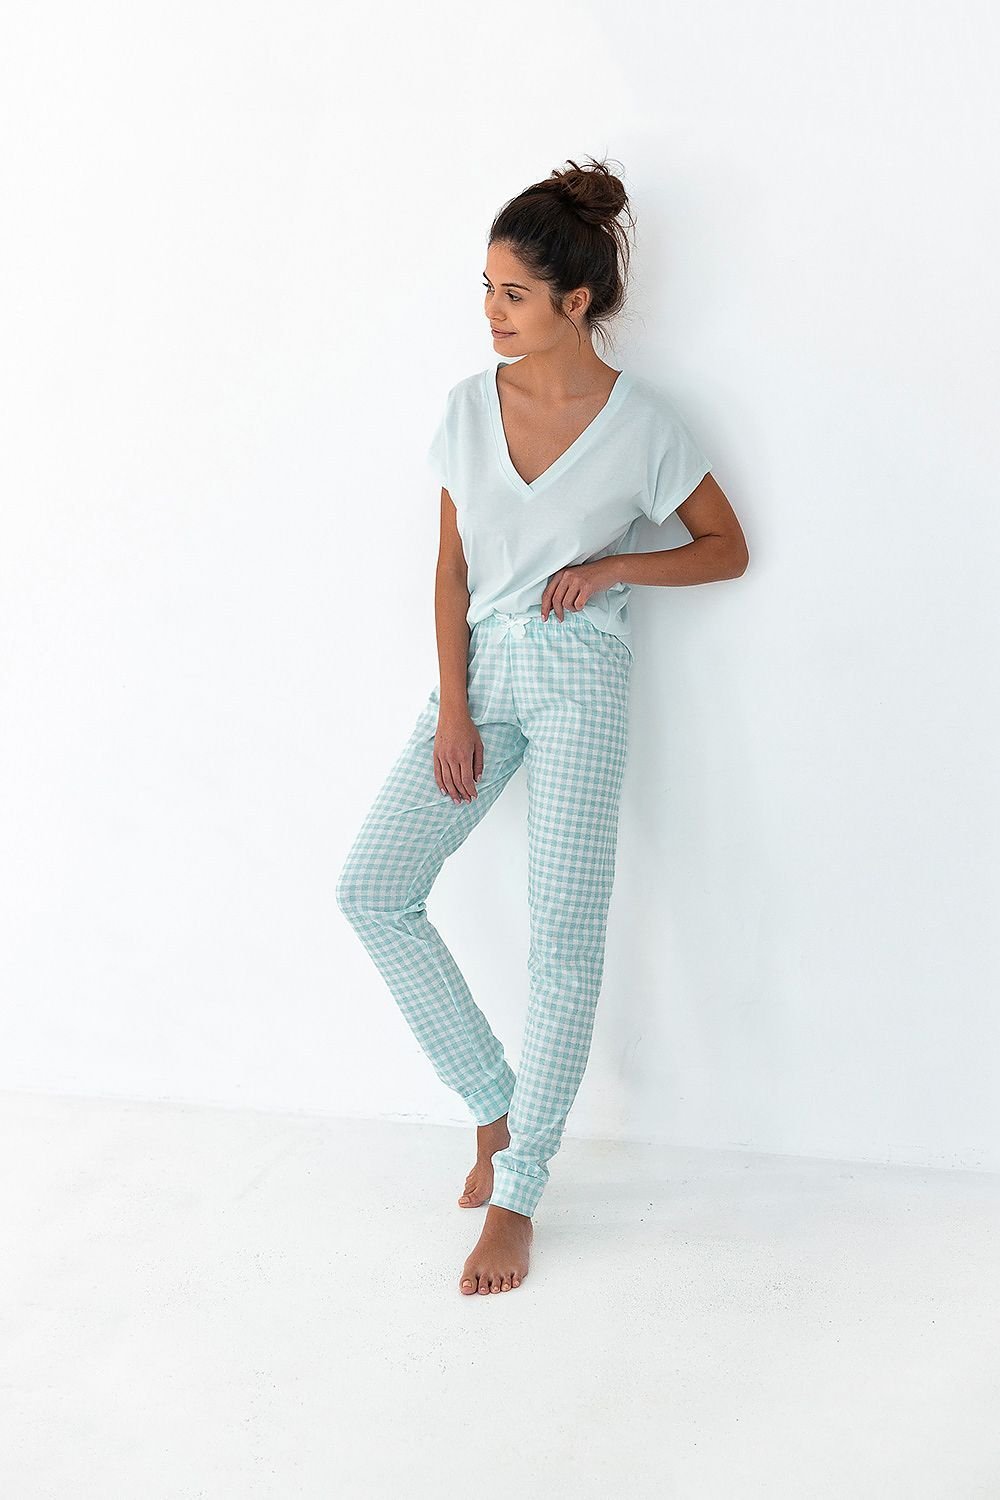 Pyjama - M&H FashionPyjamaM&H FashionM&H Fashion179542_10583495902921434368LPyjama SensisM&H FashionM&H FashionWomen's pajamas made of high quality fine cotton. T-shirt with short sleeves. For the set long pants. The set perfectly enhances the shapes. Pants finished with a wePyjama